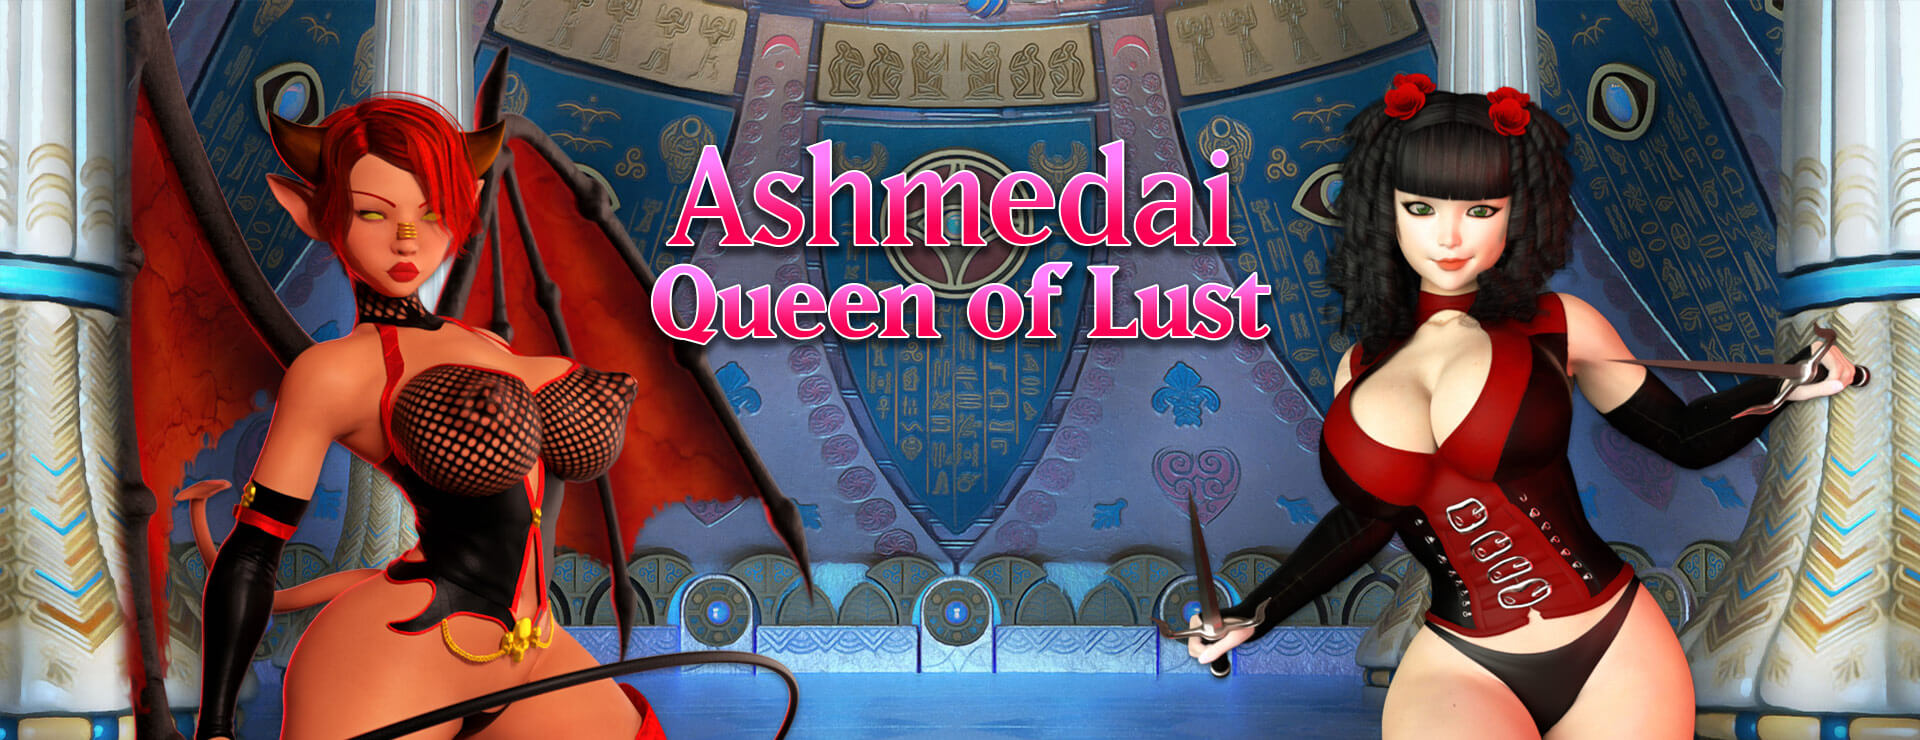 Ashmedai - Queen of Lust - RPG Game